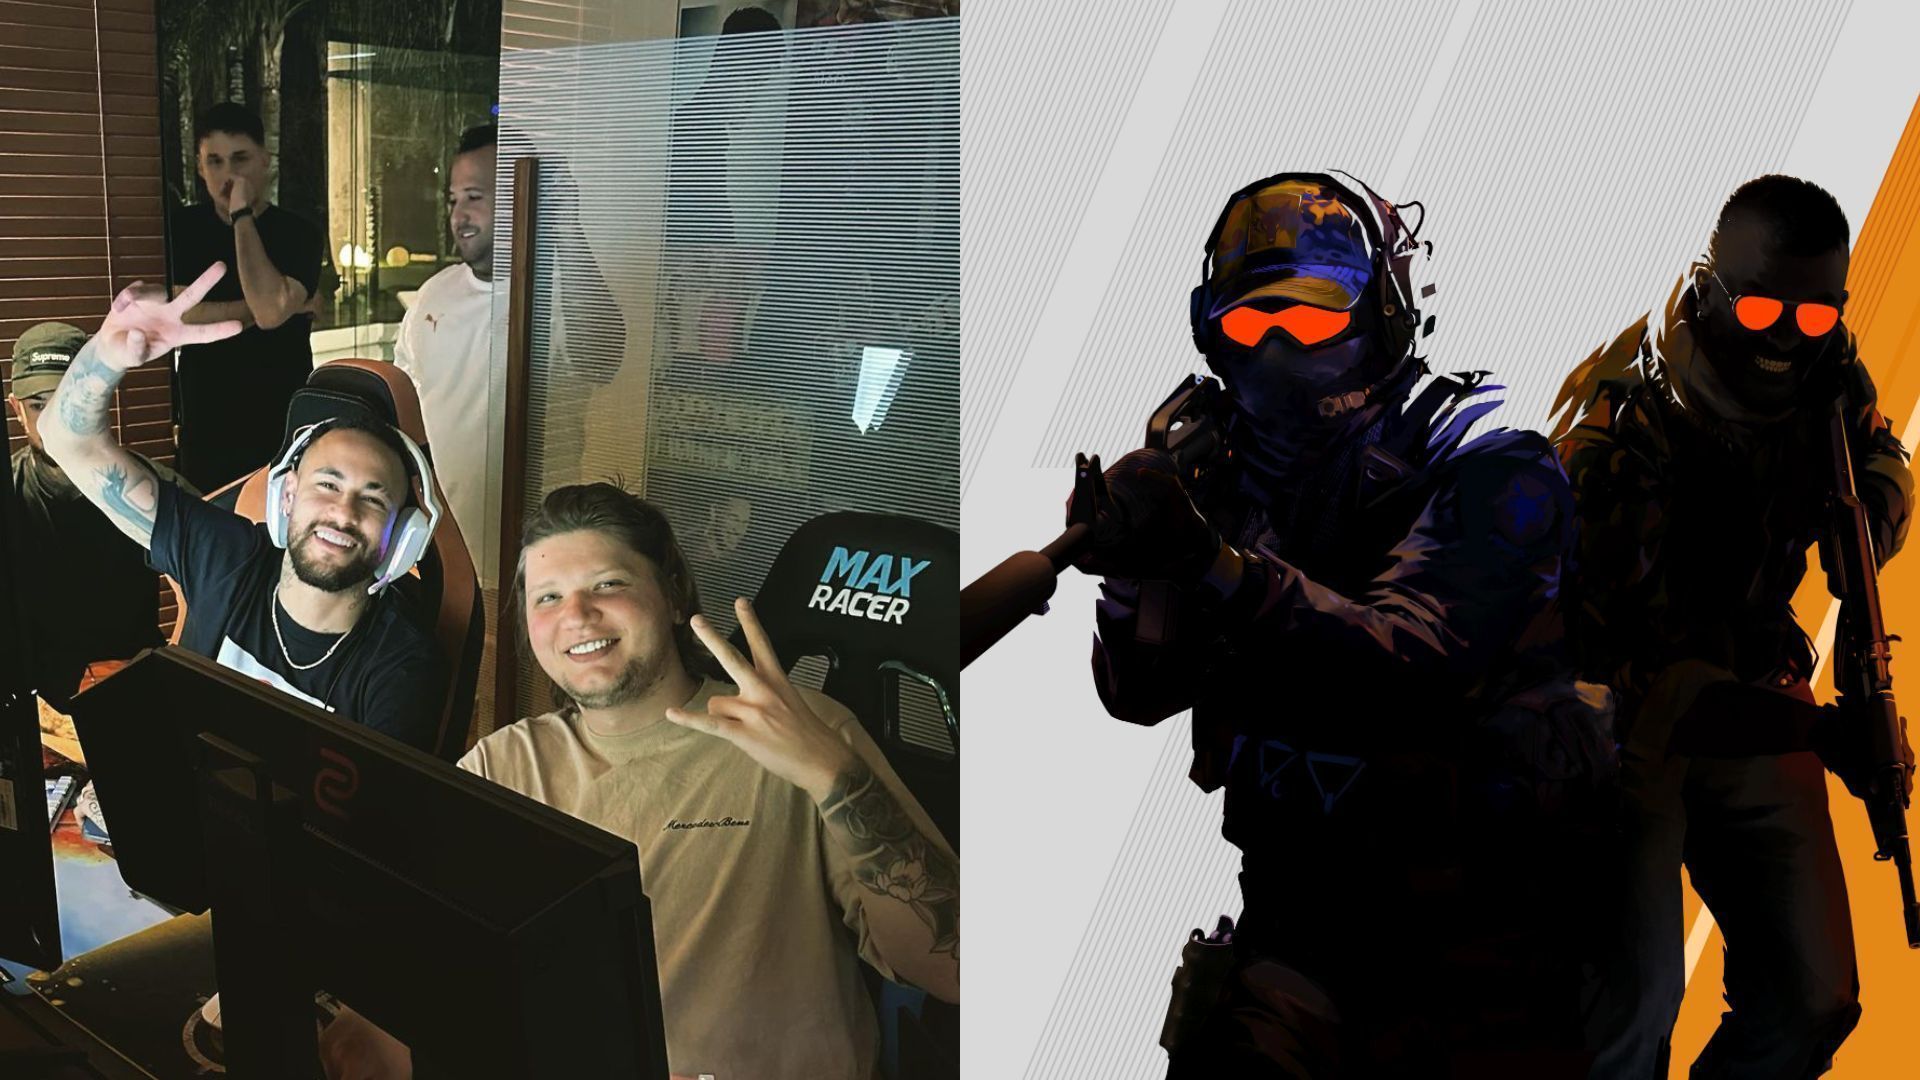 S1mple and Neymar played Counter-Strike together in Brazil (Image via Sportskeeda)